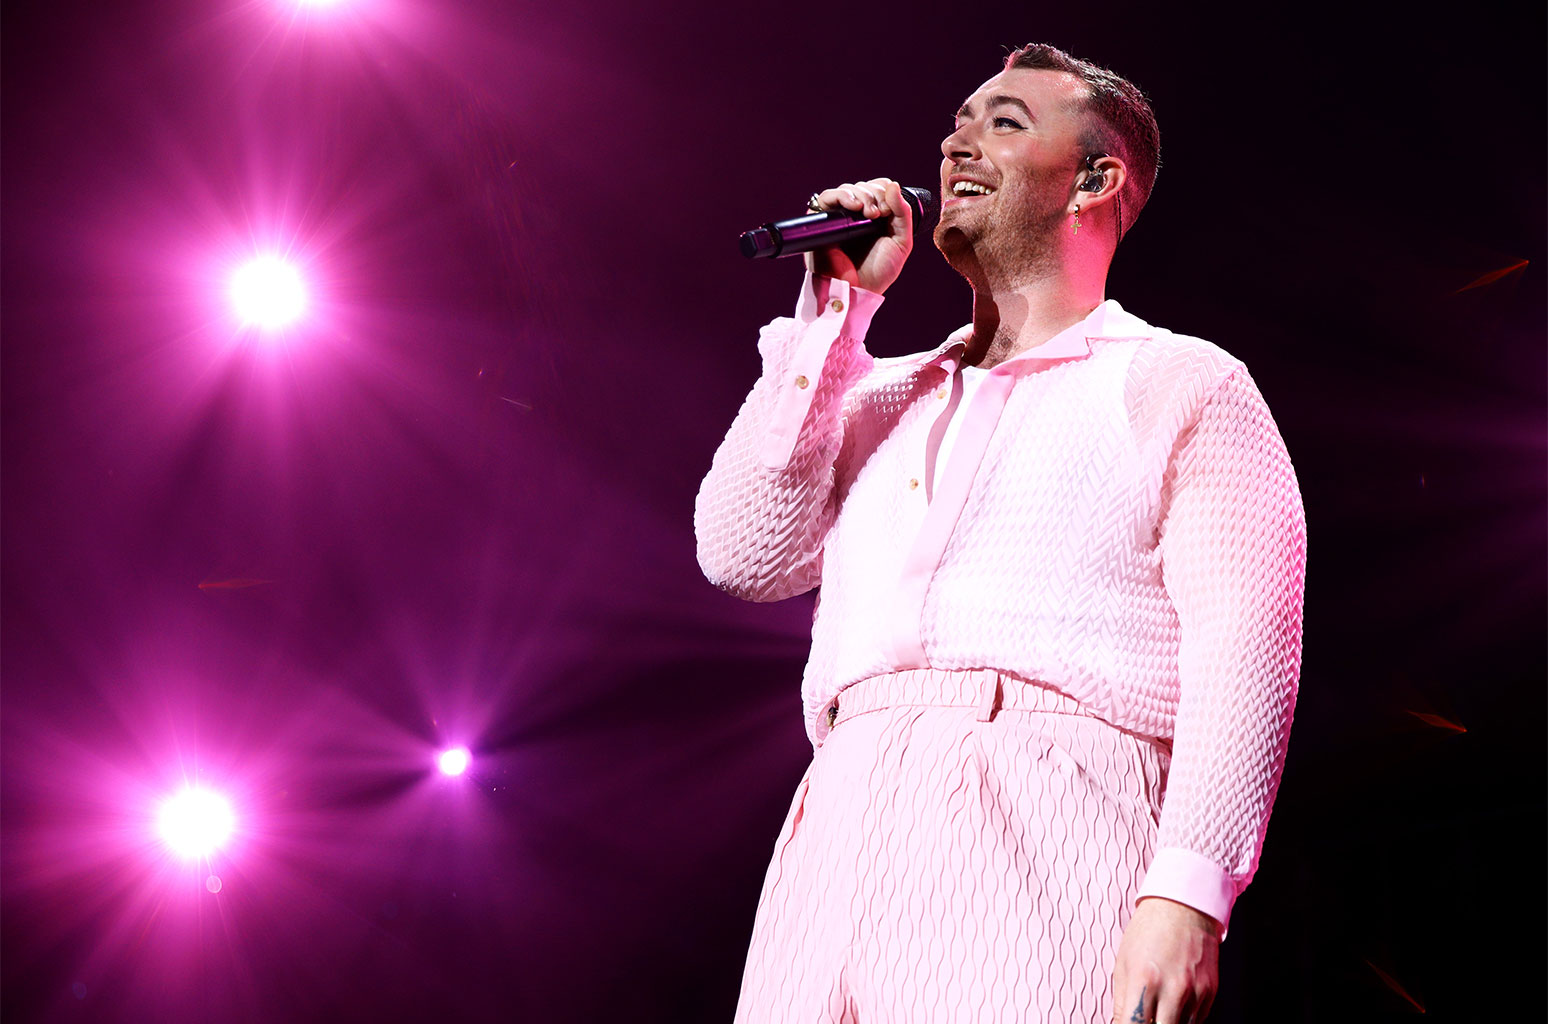 Sam Smith Encourages Fans to Love Their Bodies in Inspiring New Post - www.billboard.com